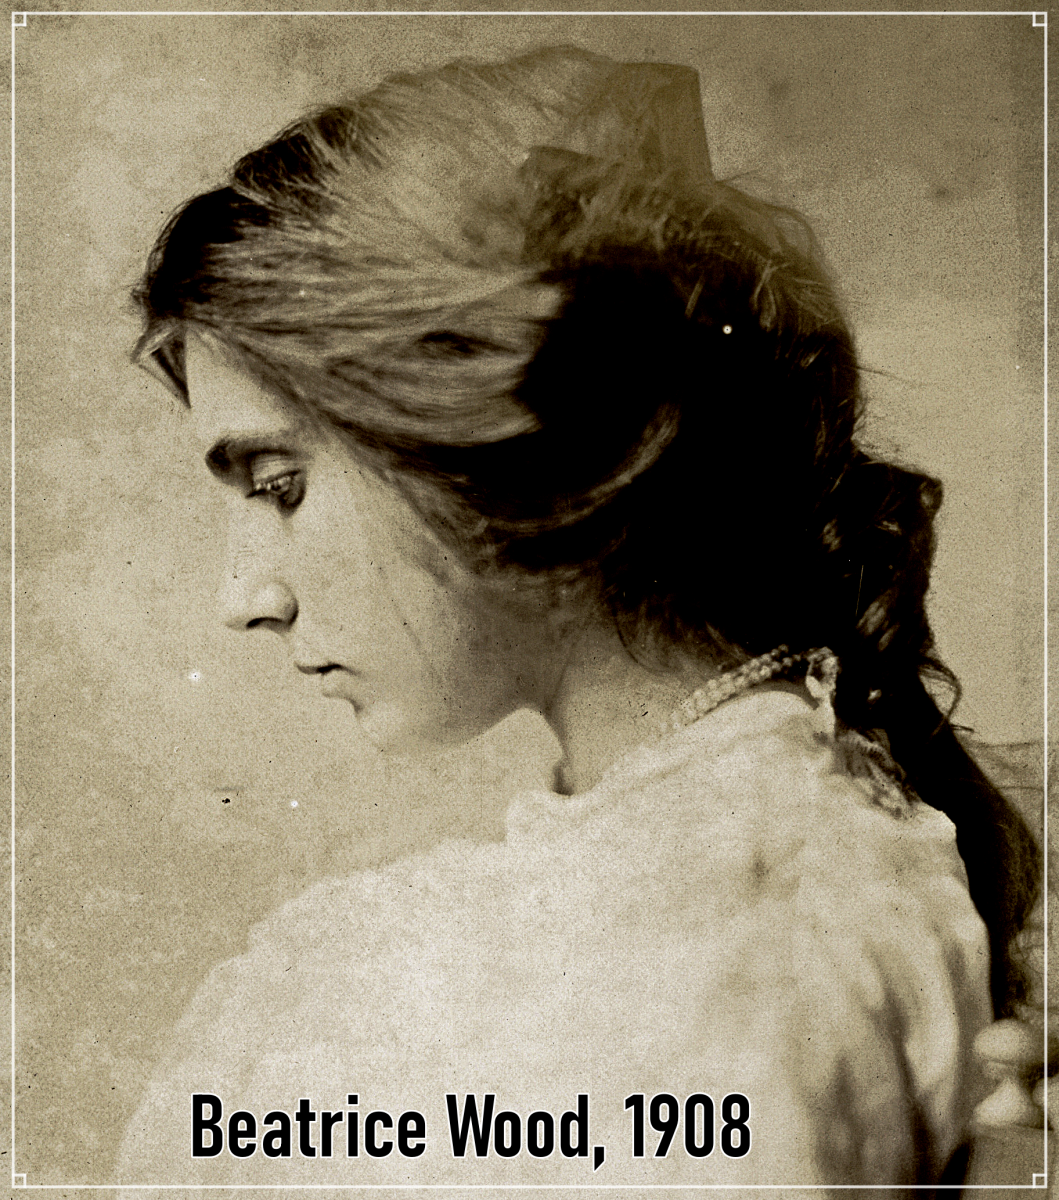 Beatrice Wood, the woman upon whom Rose Calvert was based